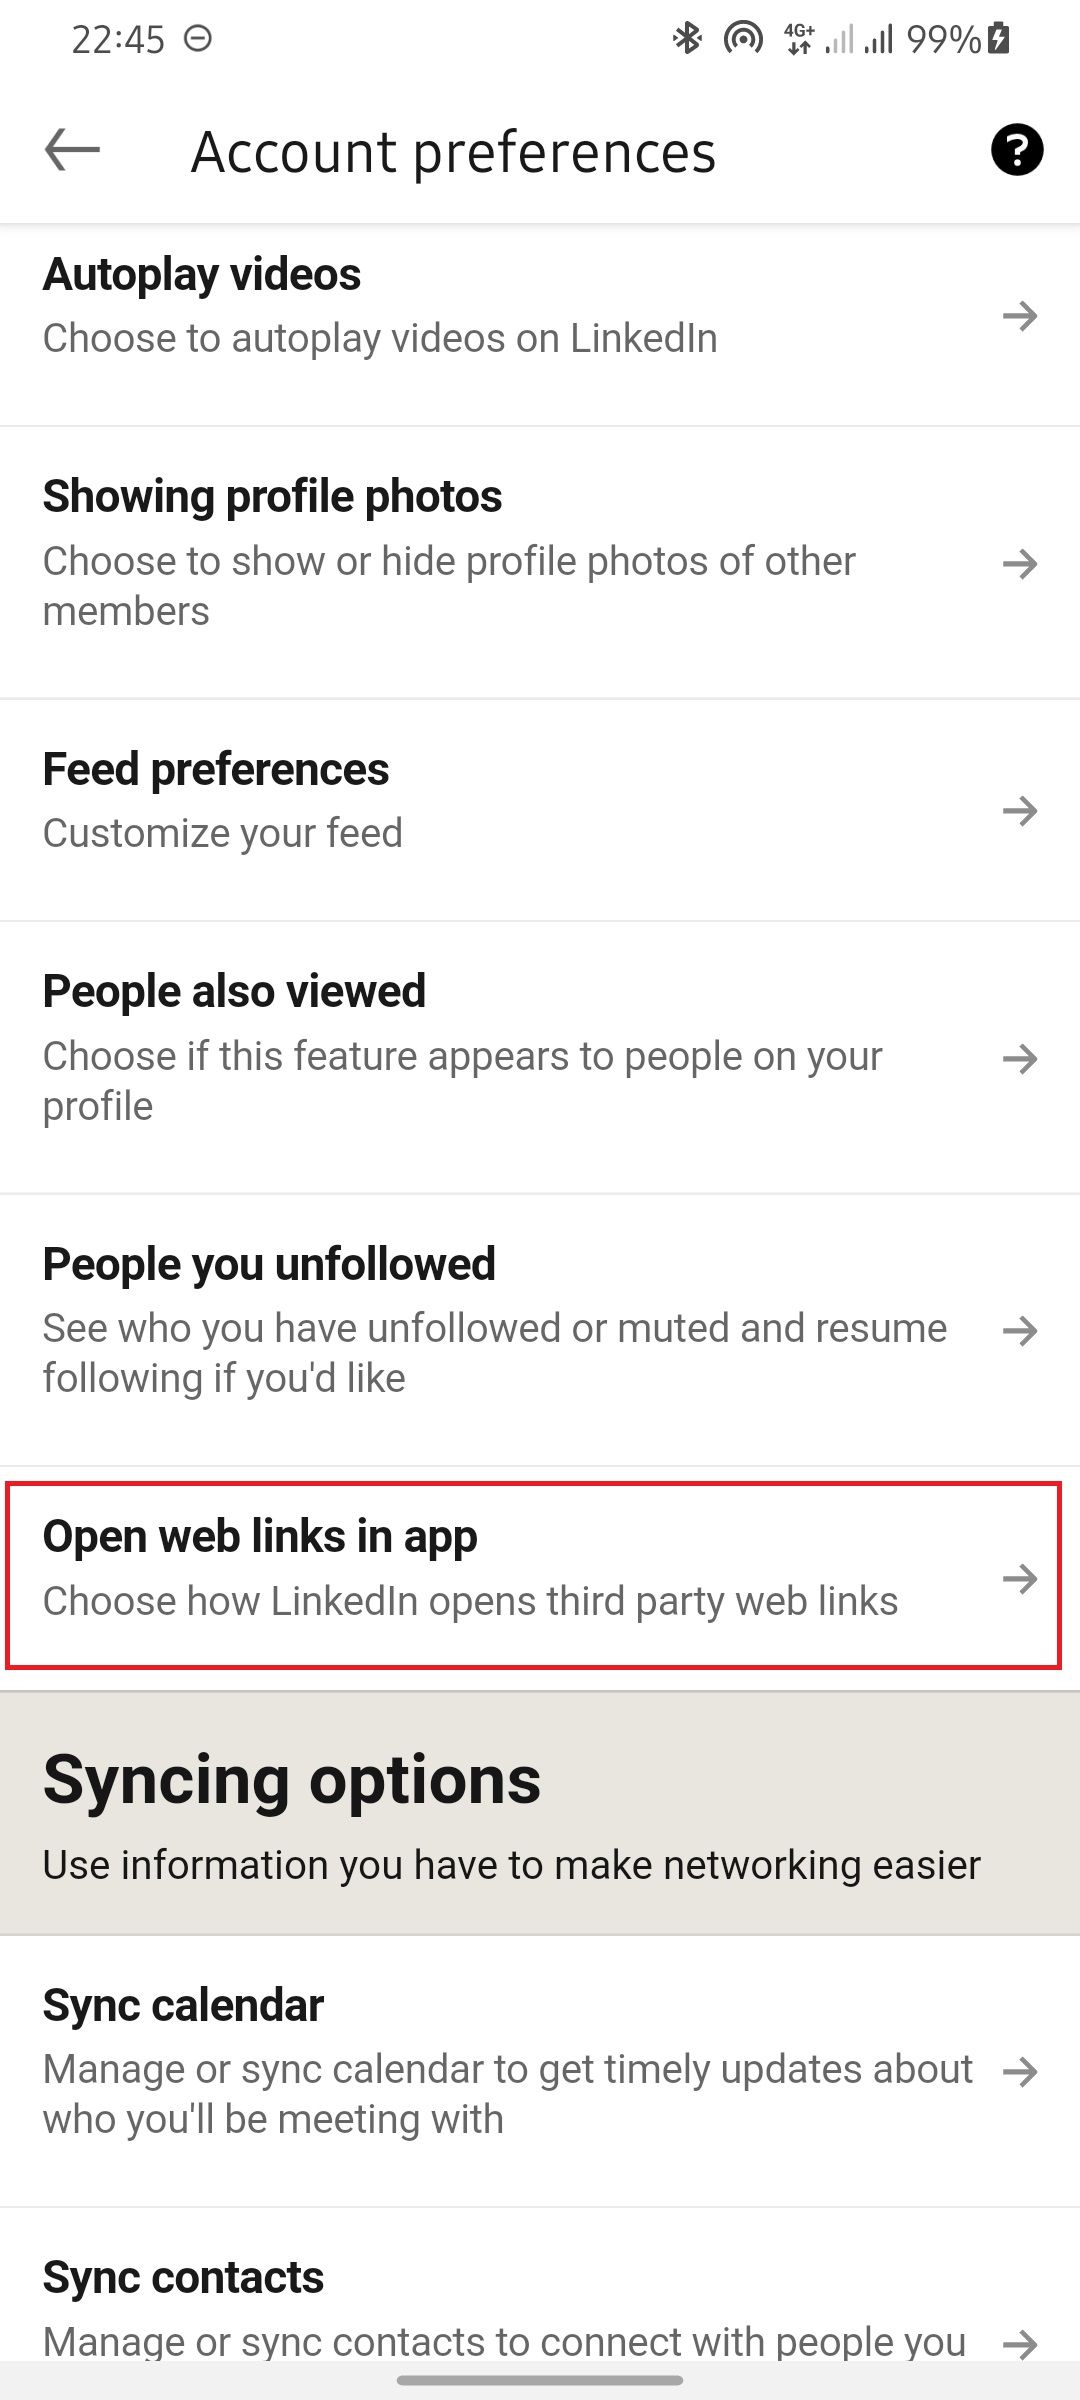 screenshot showing account preferences page on LinkedIn